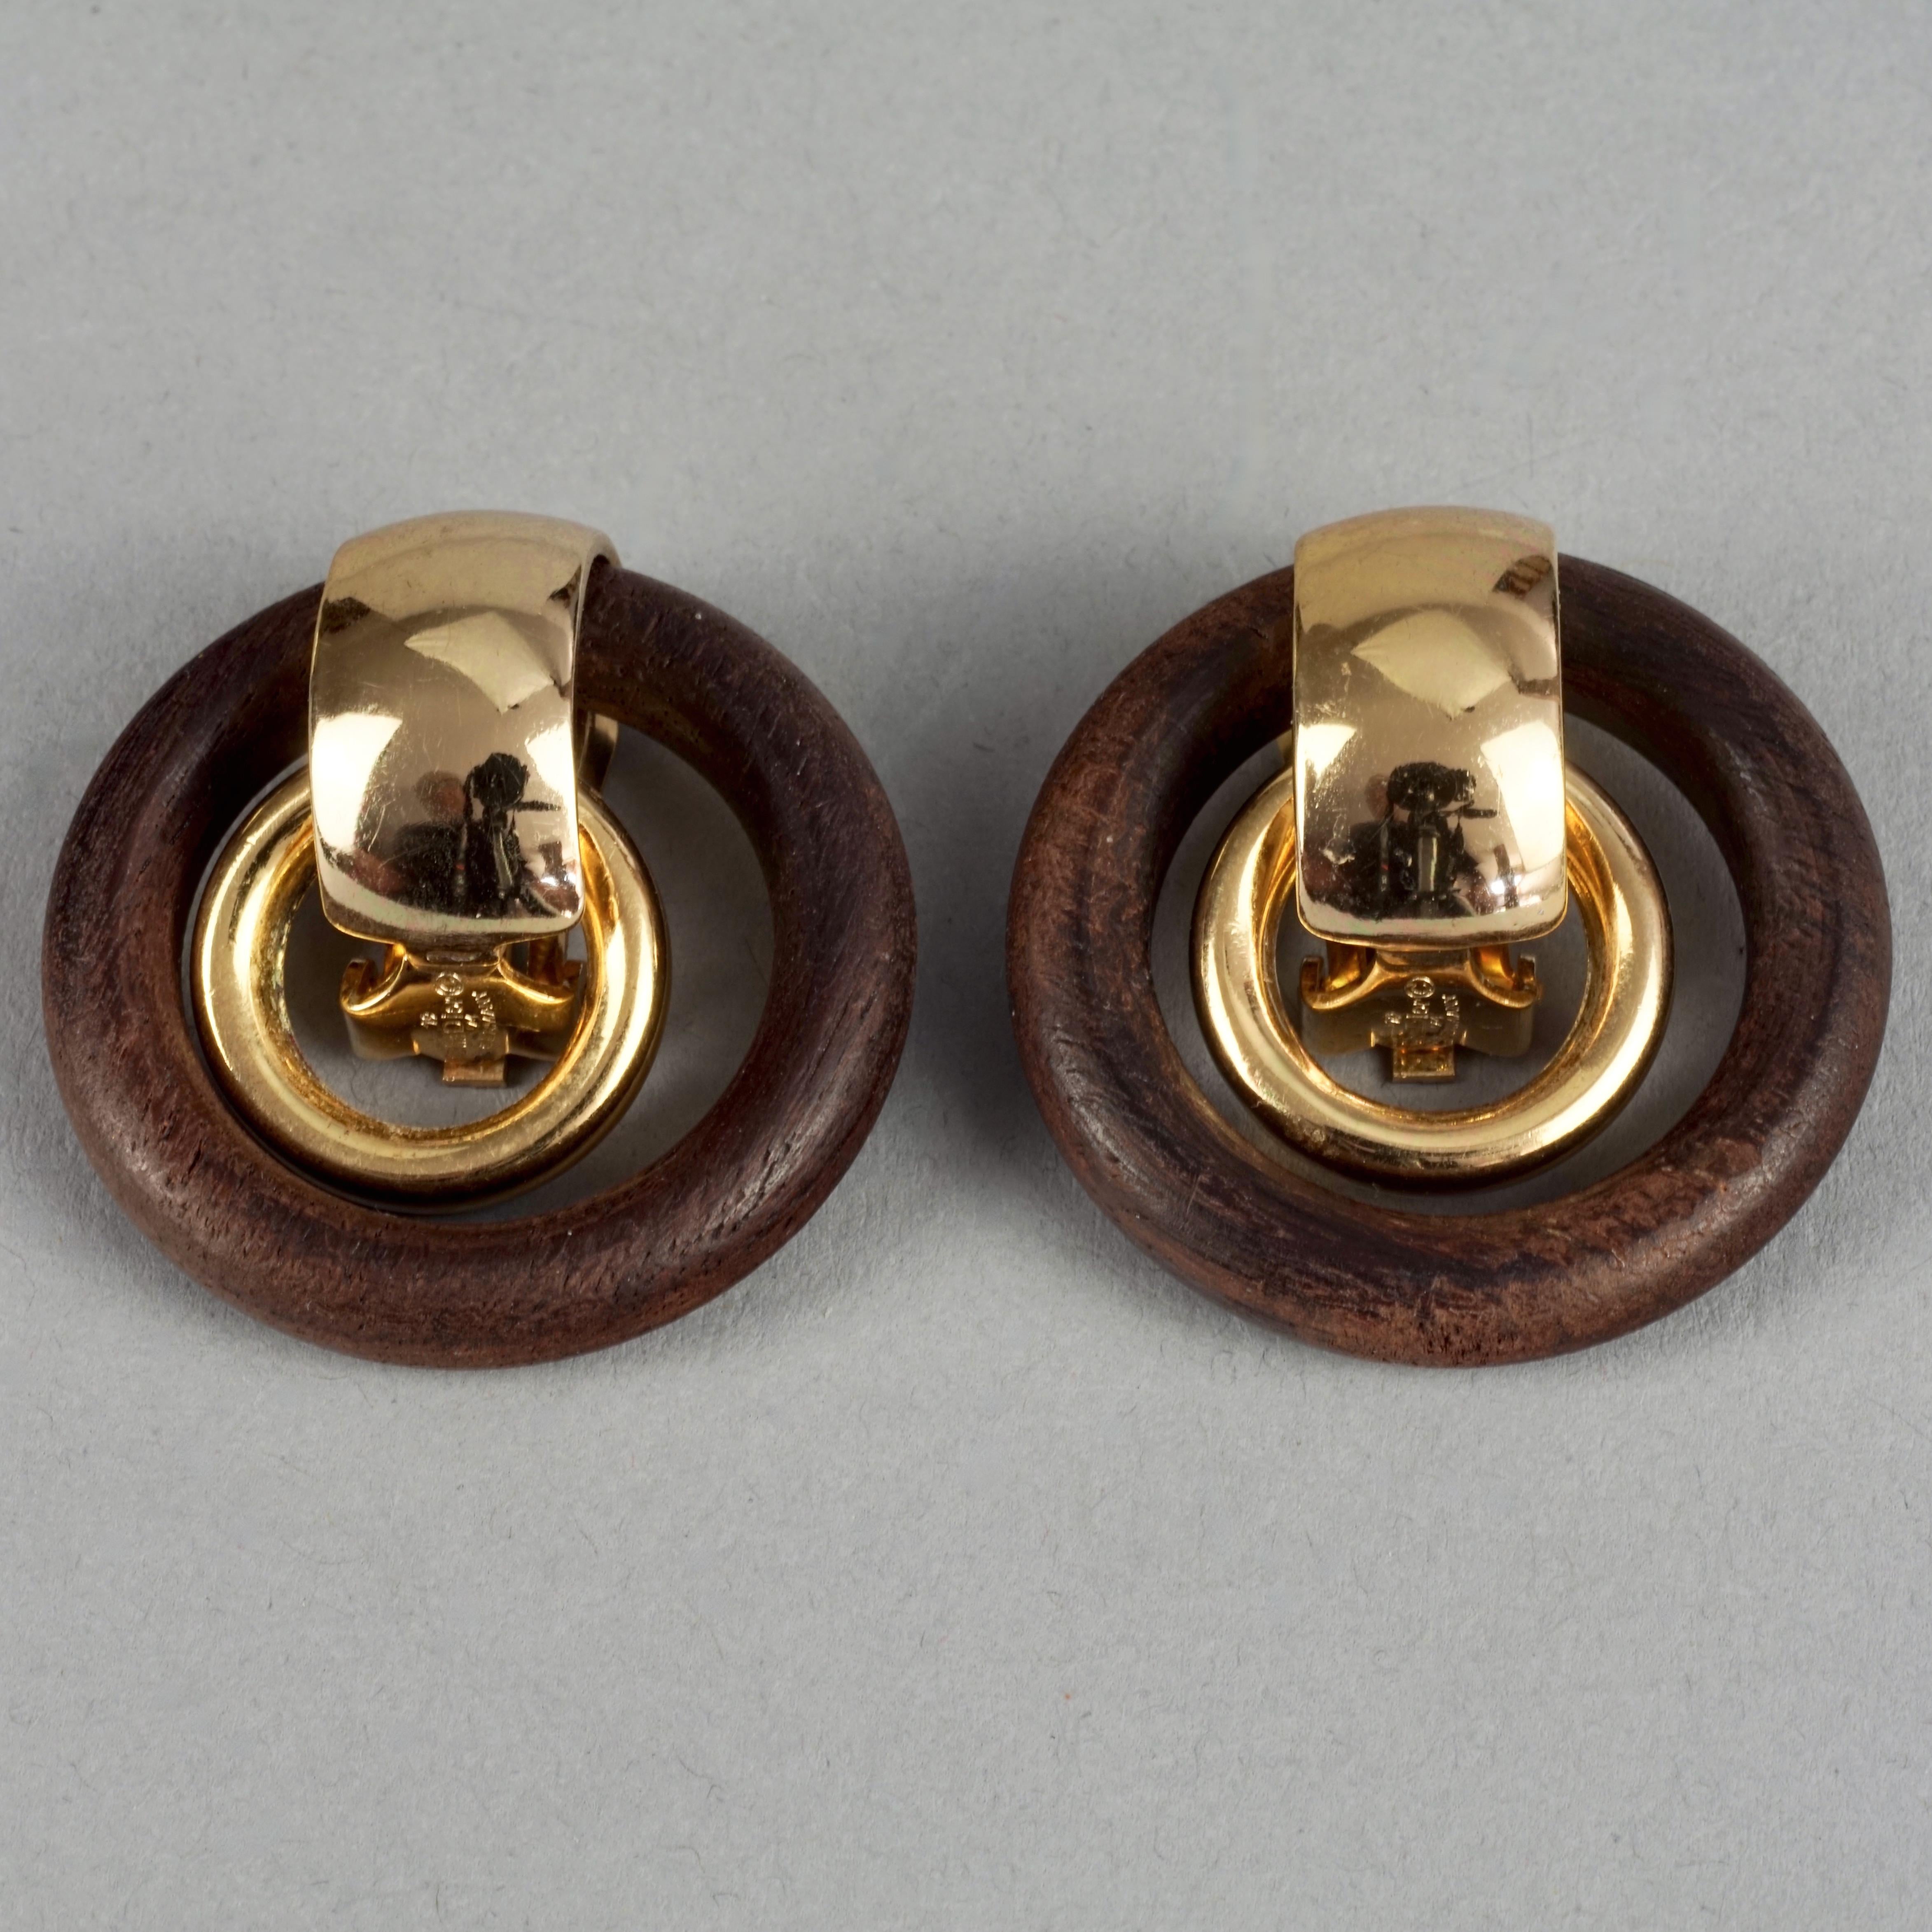 Vintage 1974 CHRISTIAN DIOR Wooden Gilt Double Hoop Earrings In Excellent Condition For Sale In Kingersheim, Alsace